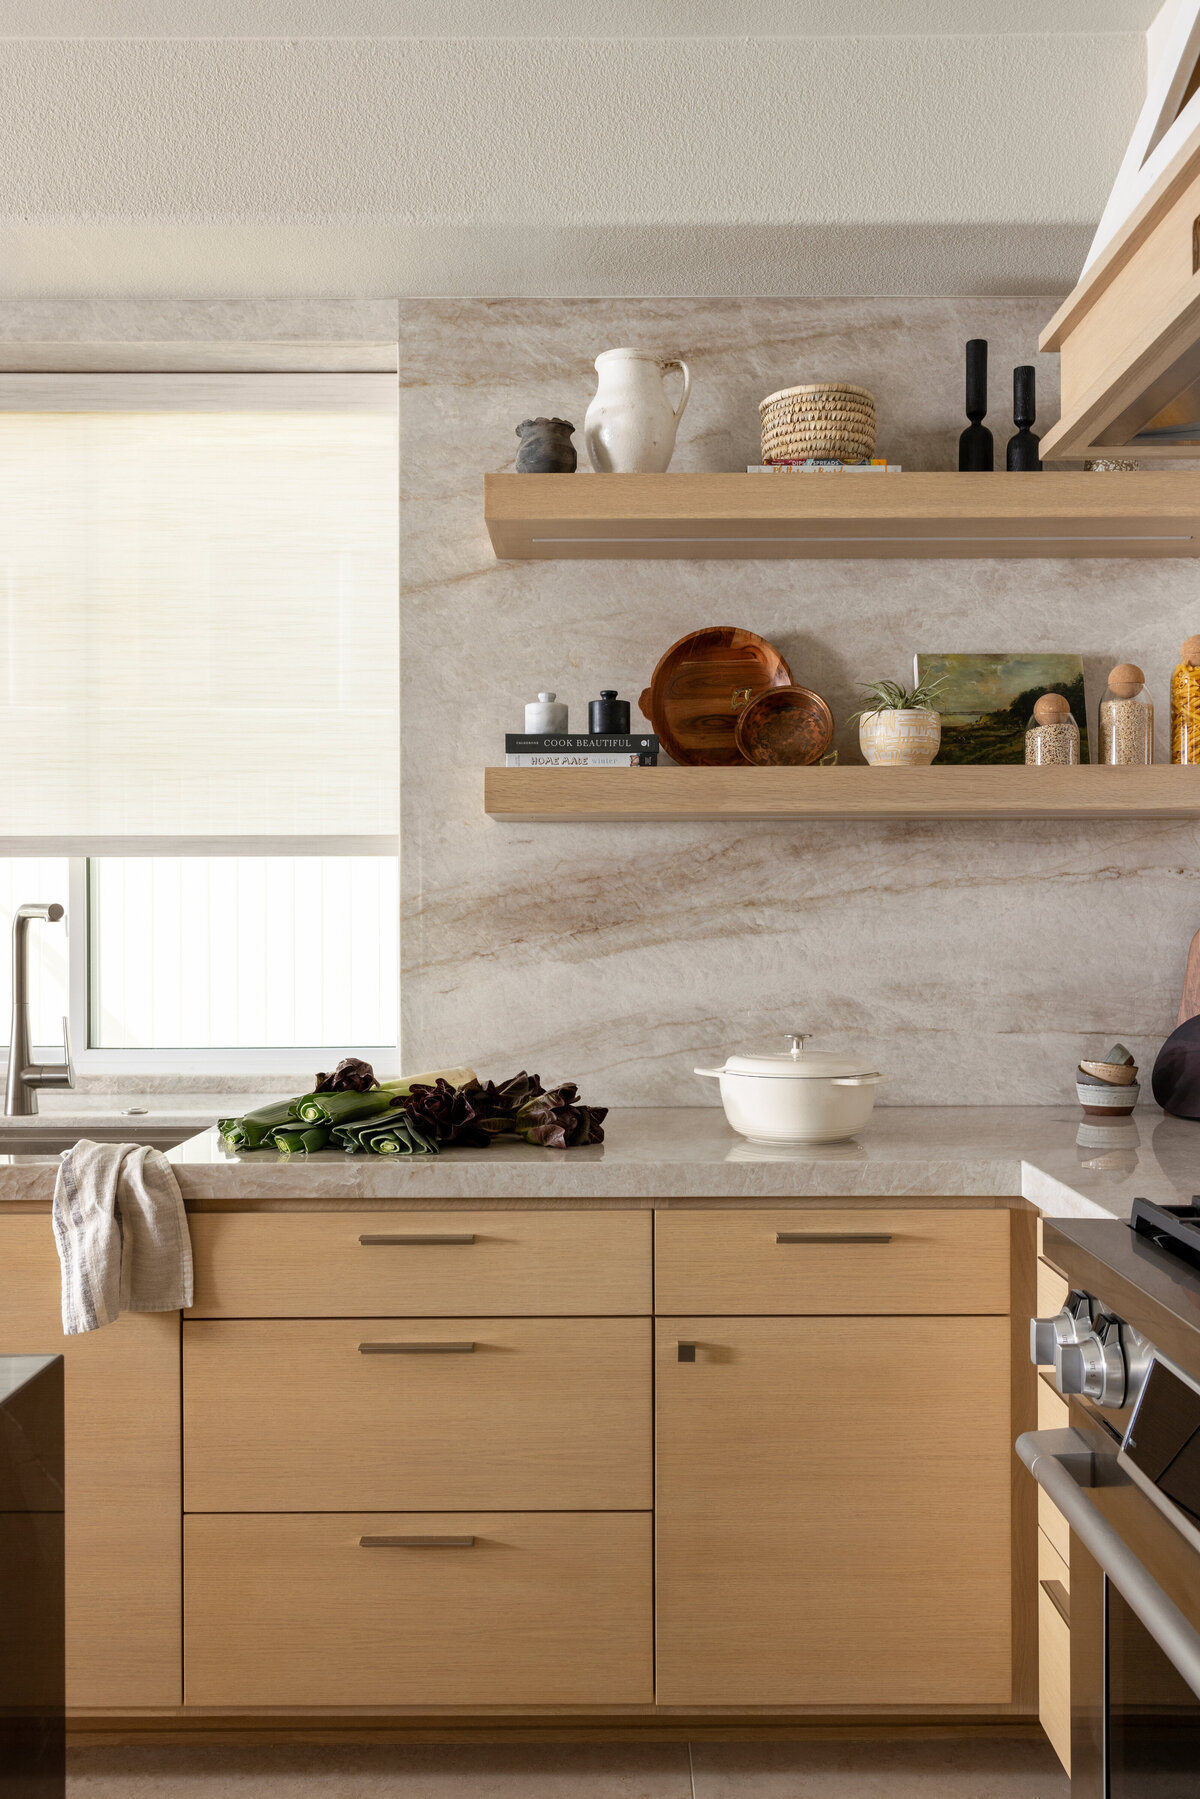 white oak cabinets with quartzite countertops and open shelving